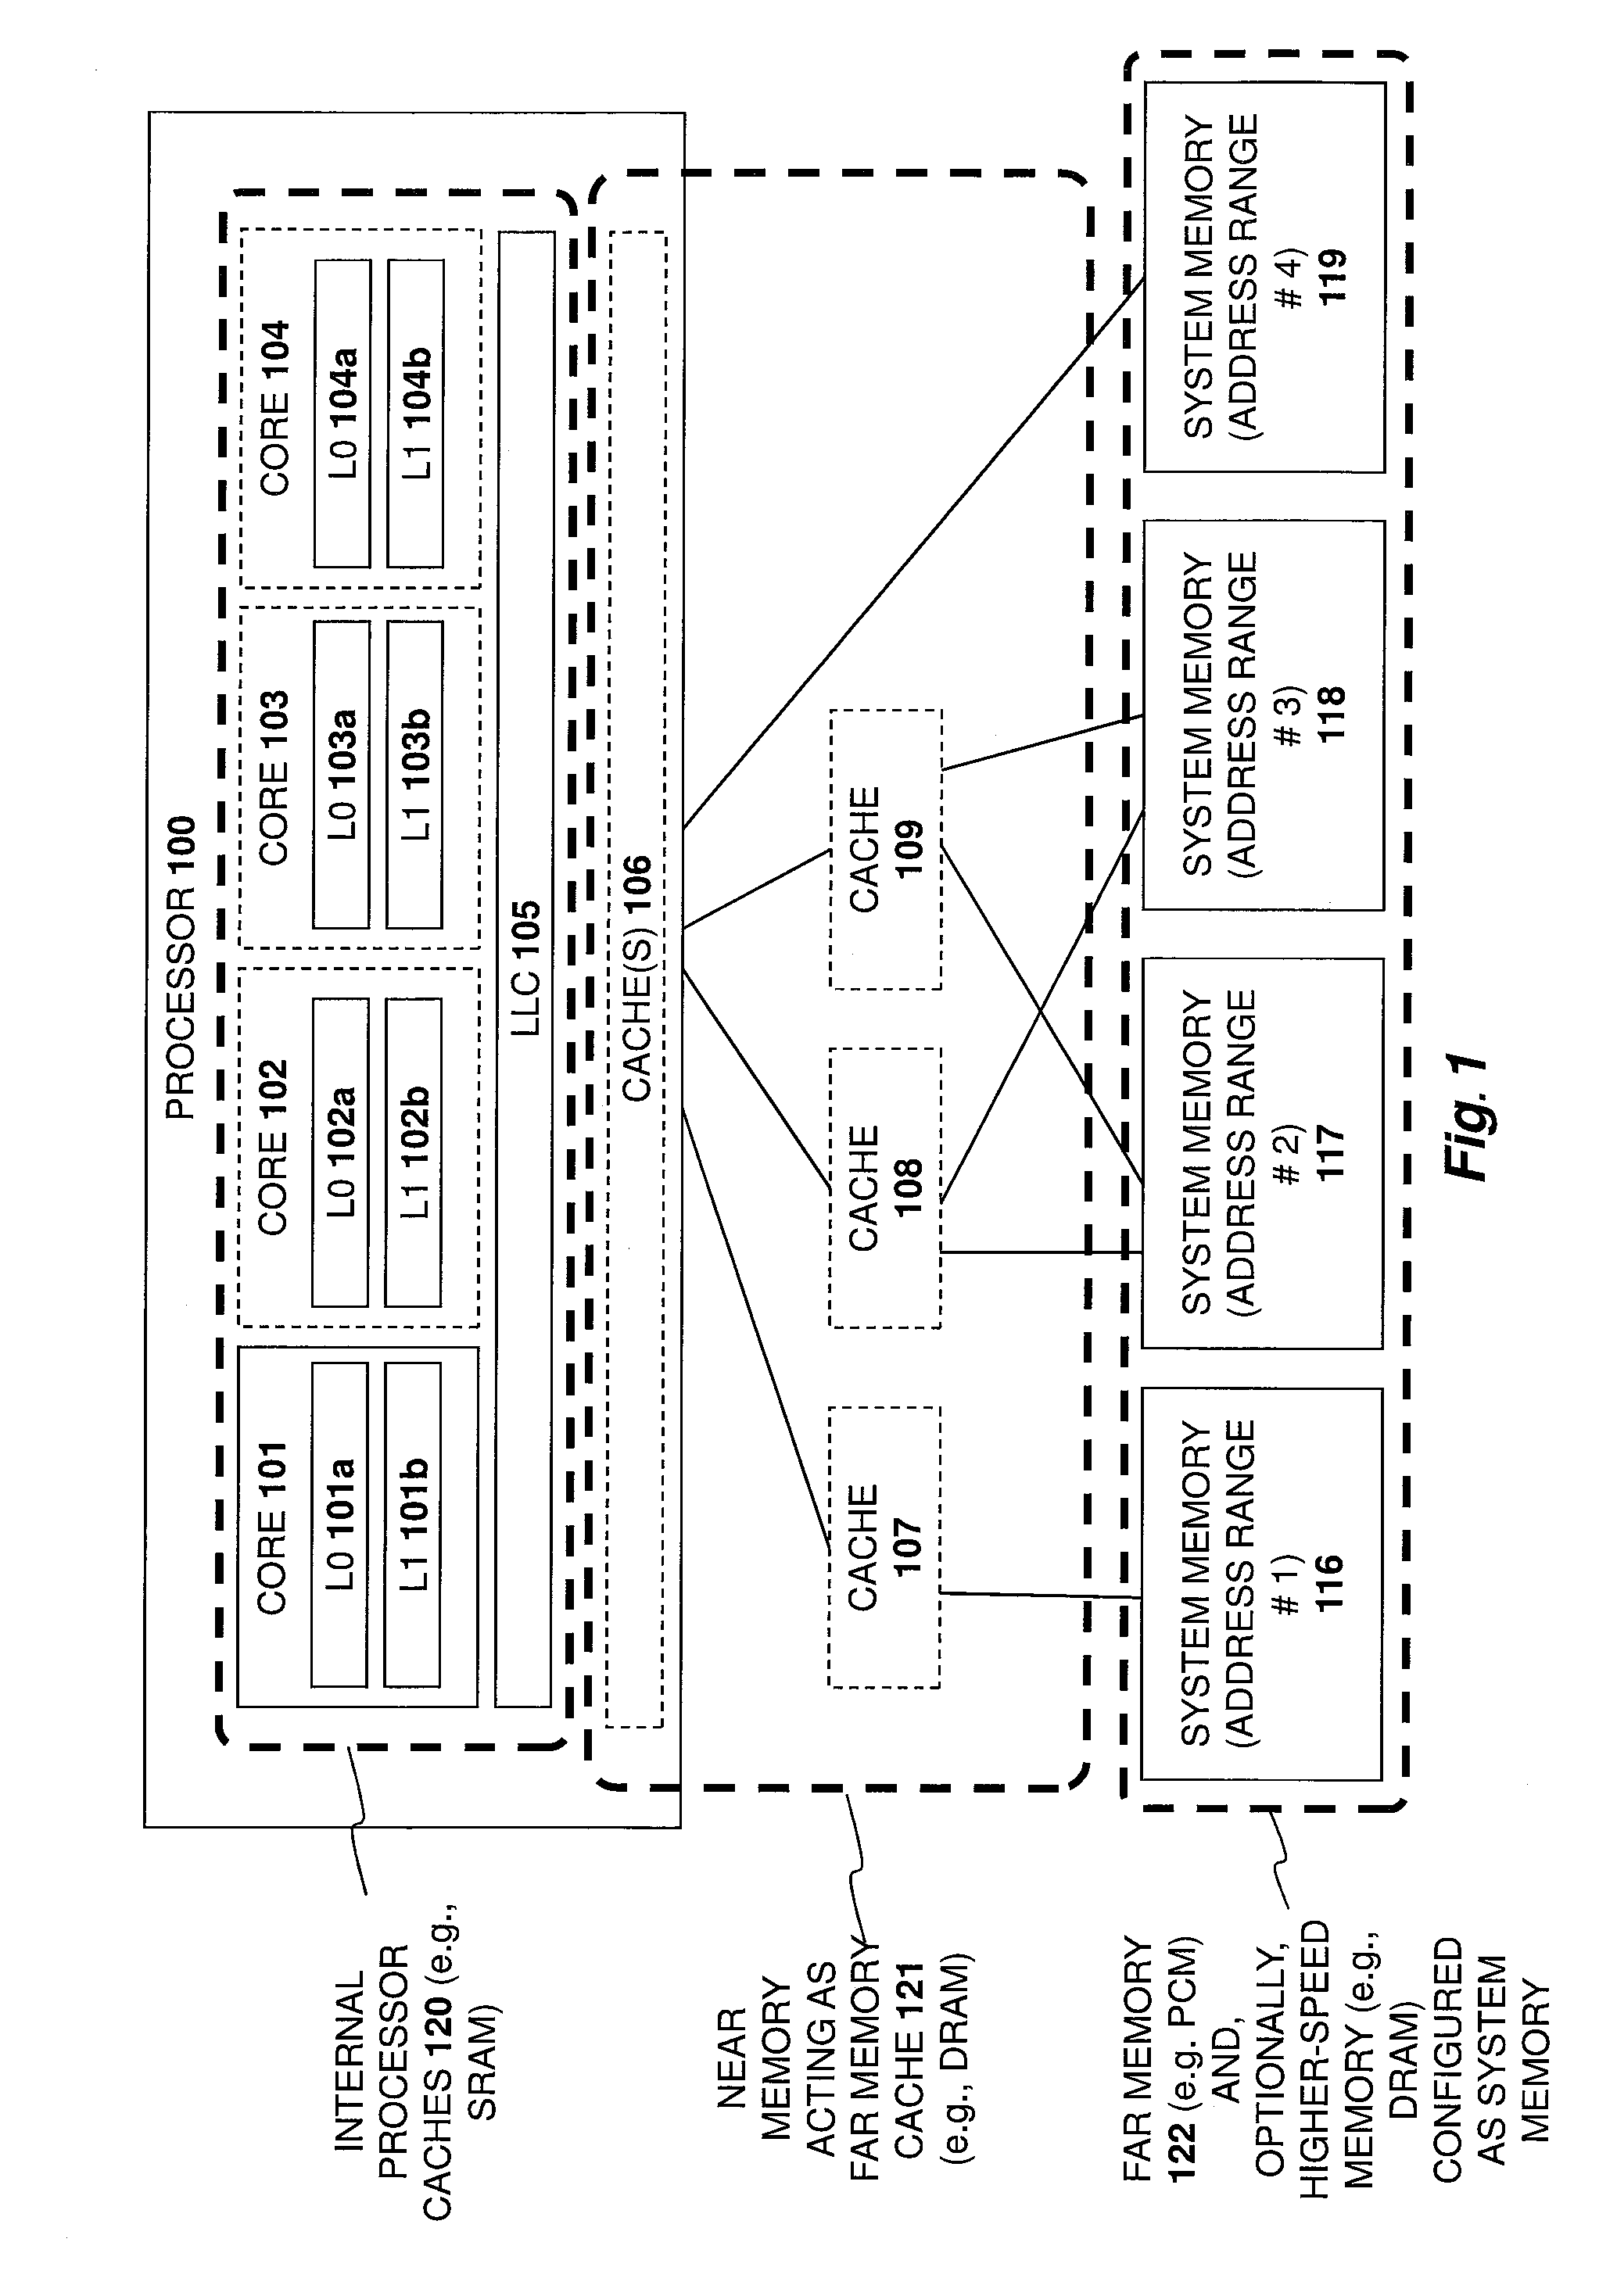 Apparatus and method for implementing a multi-level memory hierarchy